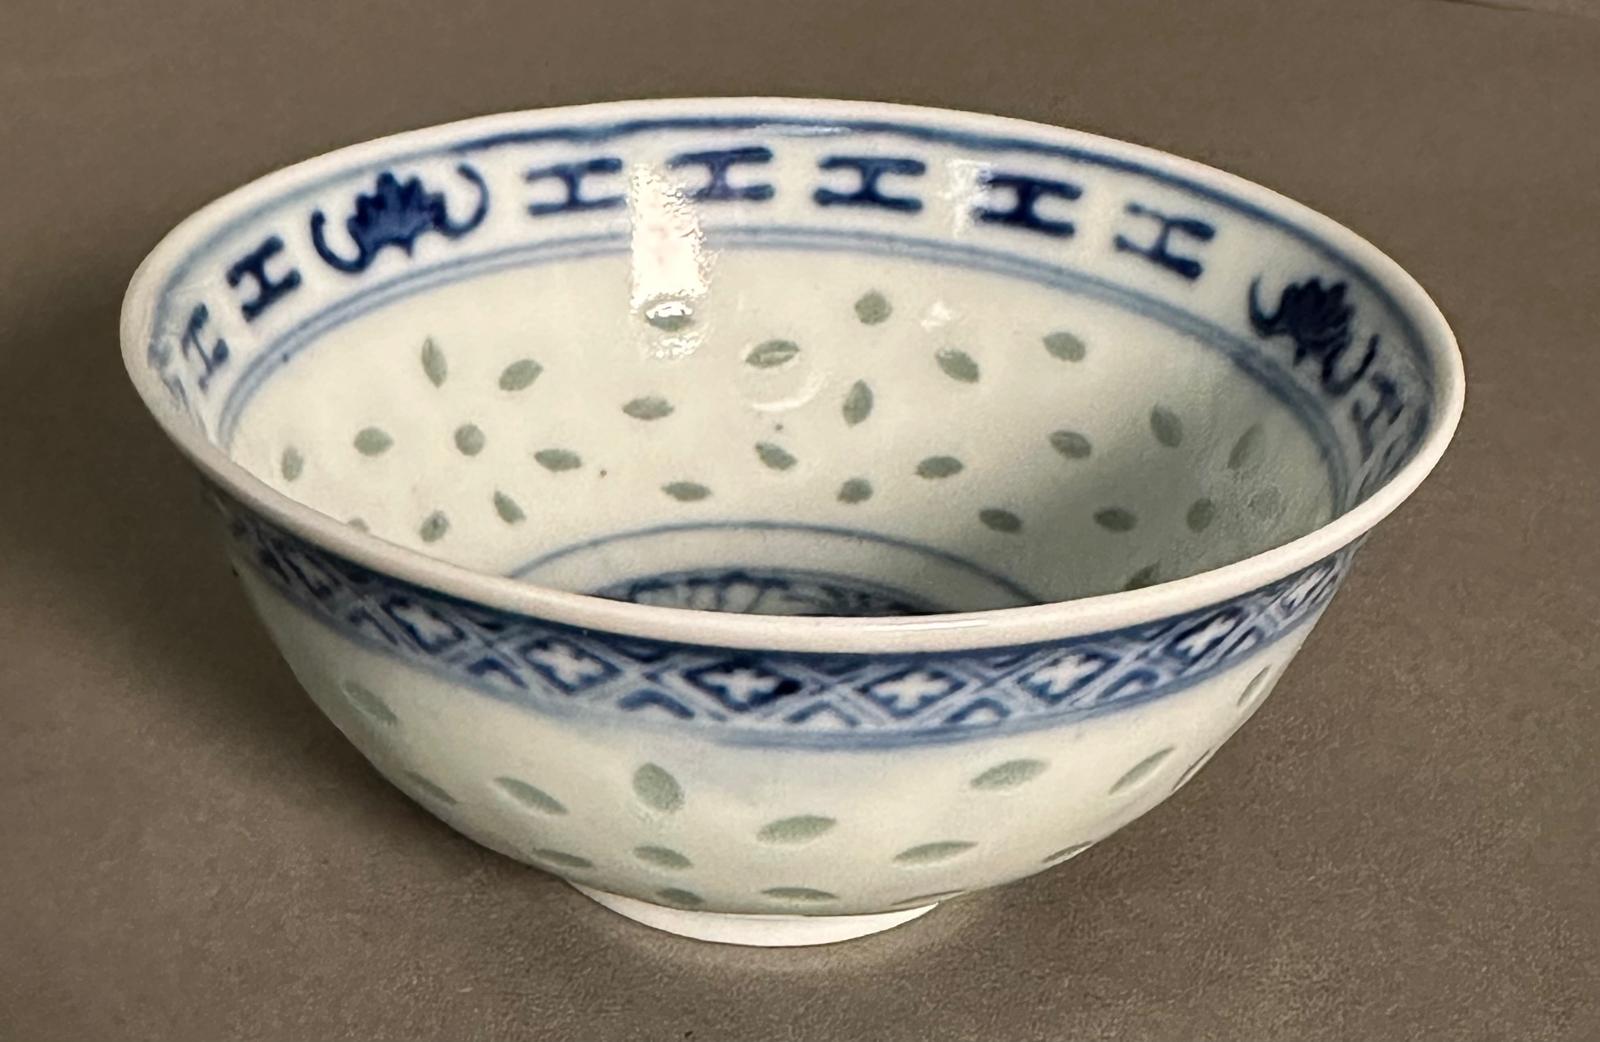 A selection of Chinese blue and white ceramic to include a plate, side plates and a small bowl - Image 11 of 12